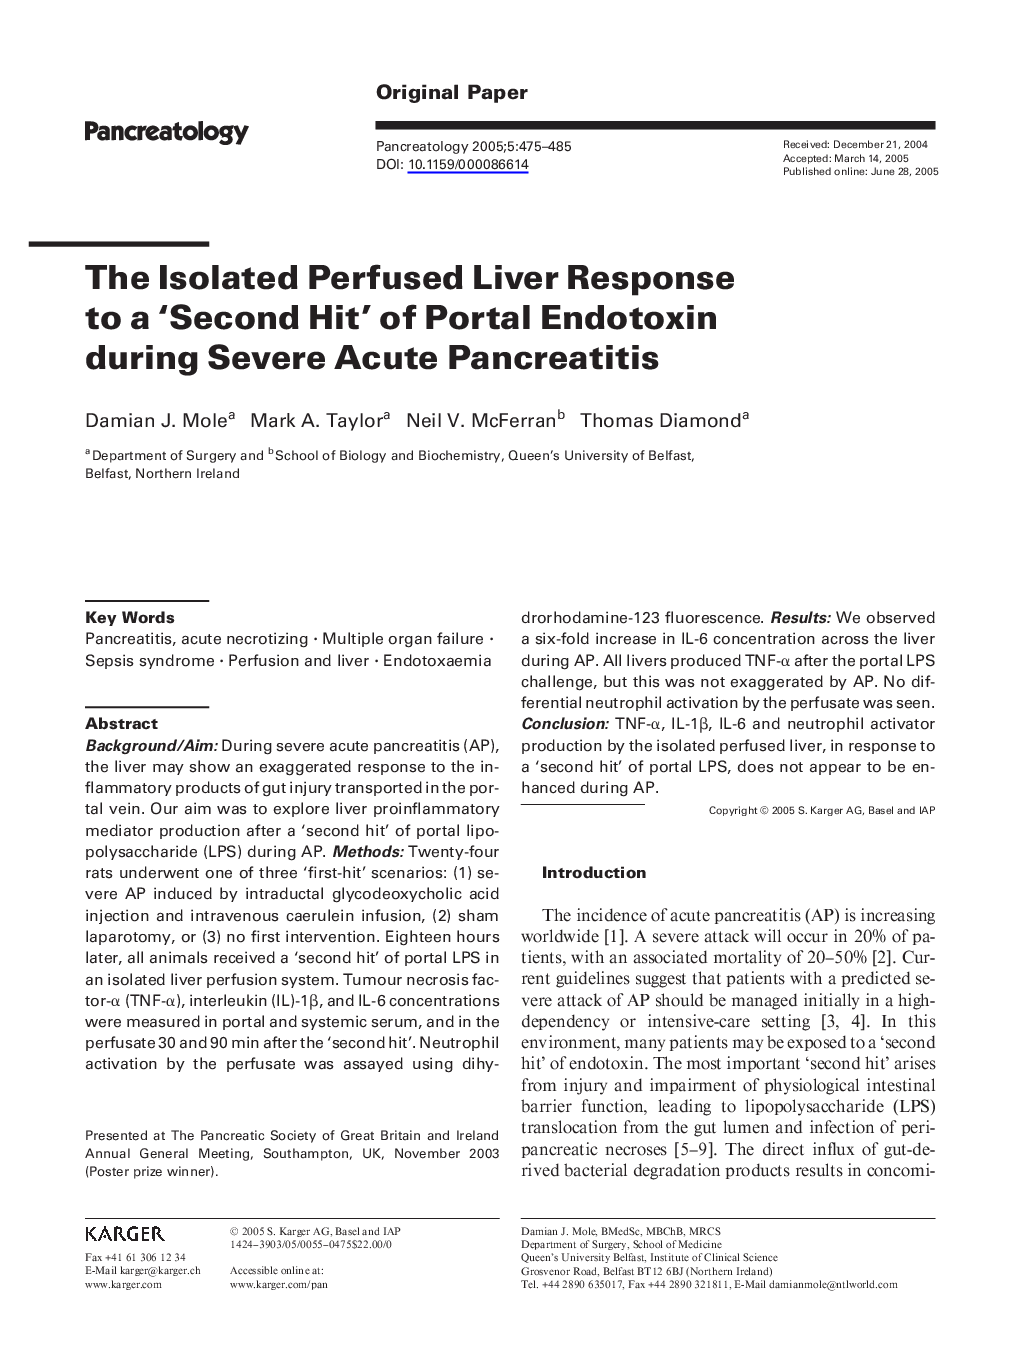 The isolated perfused liver response to a âsecond hit' of portal endotoxin during severe acute pancreatitis